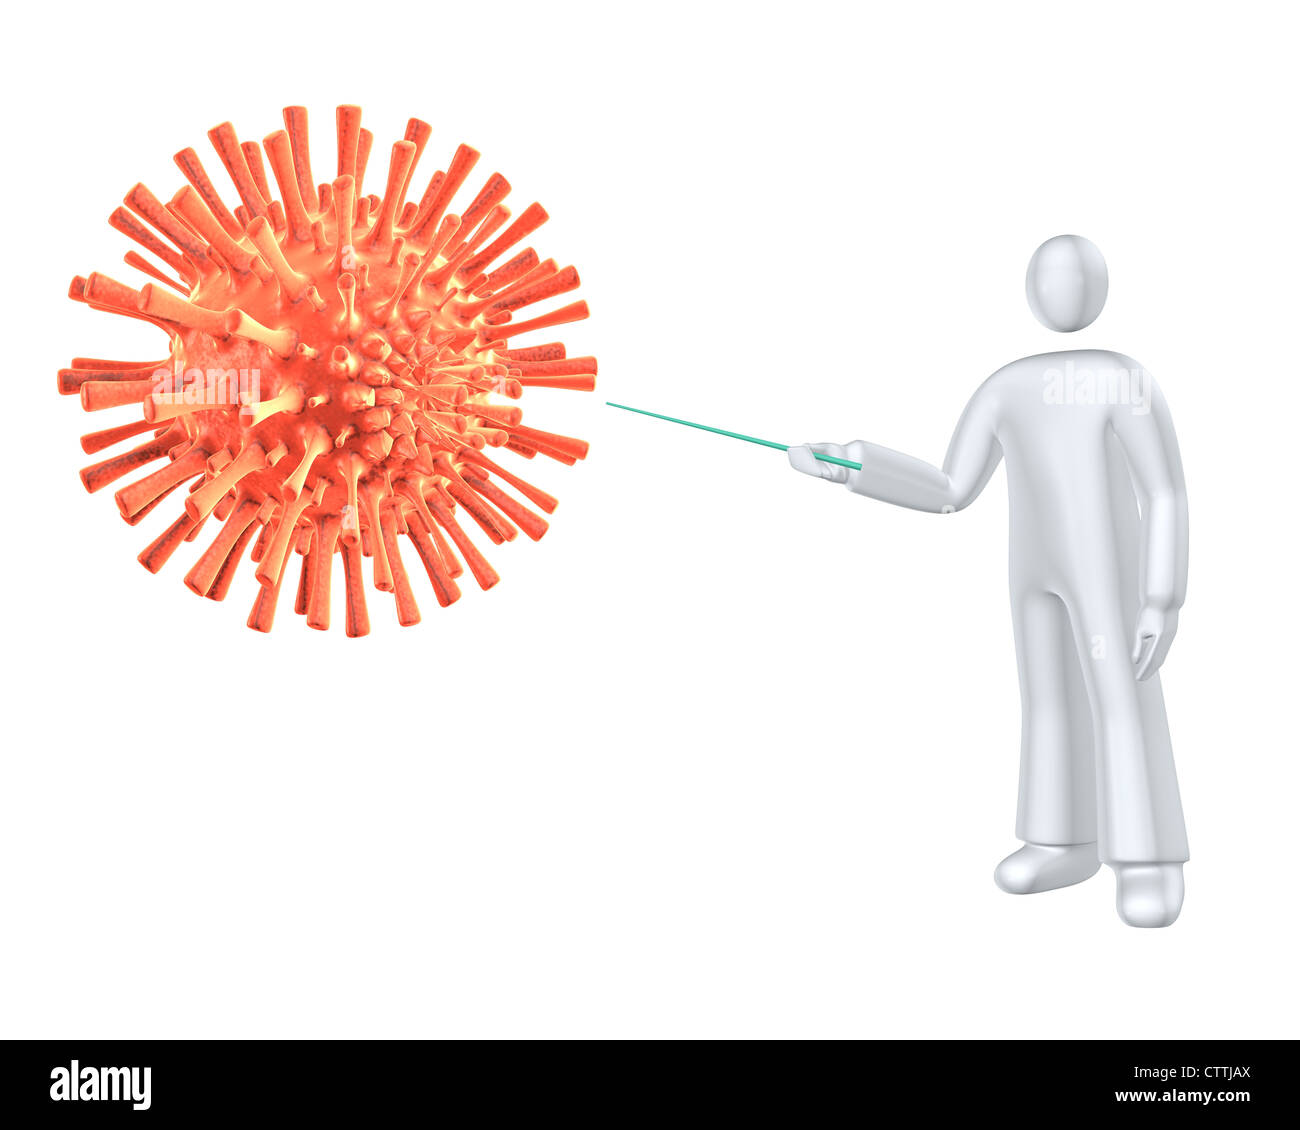 This is the virus - Person showing abstract flu like virus Stock Photo